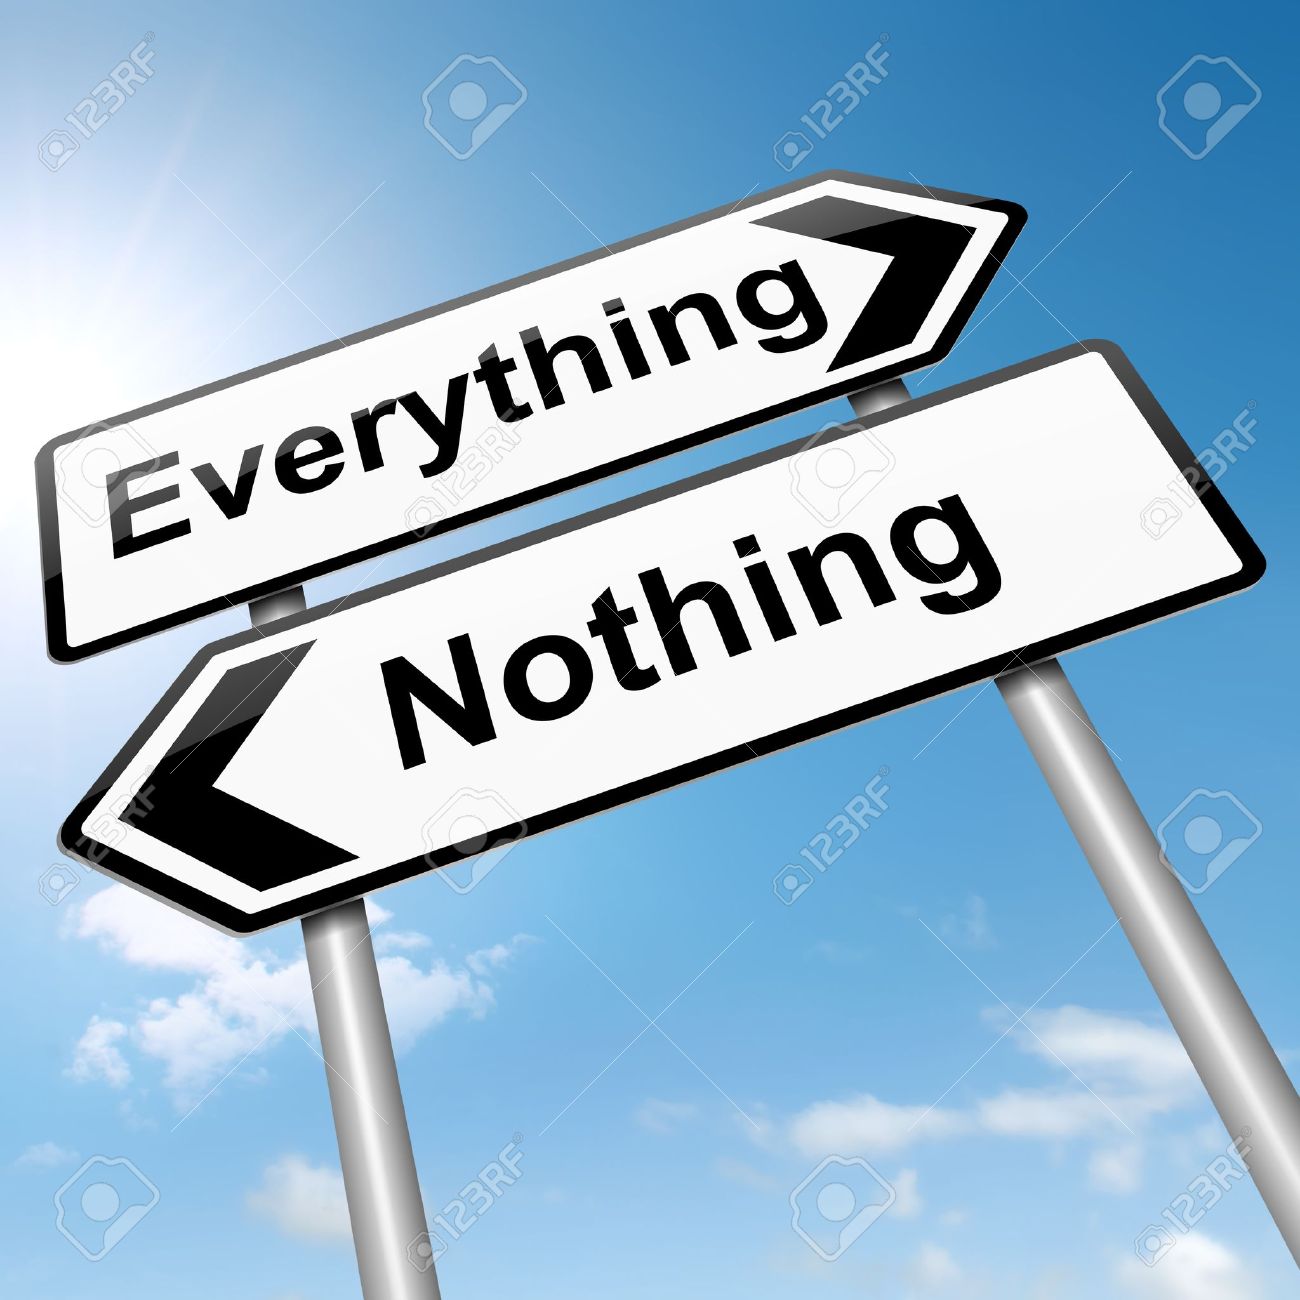 Everything Or Nothing HD wallpapers, Desktop wallpaper - most viewed